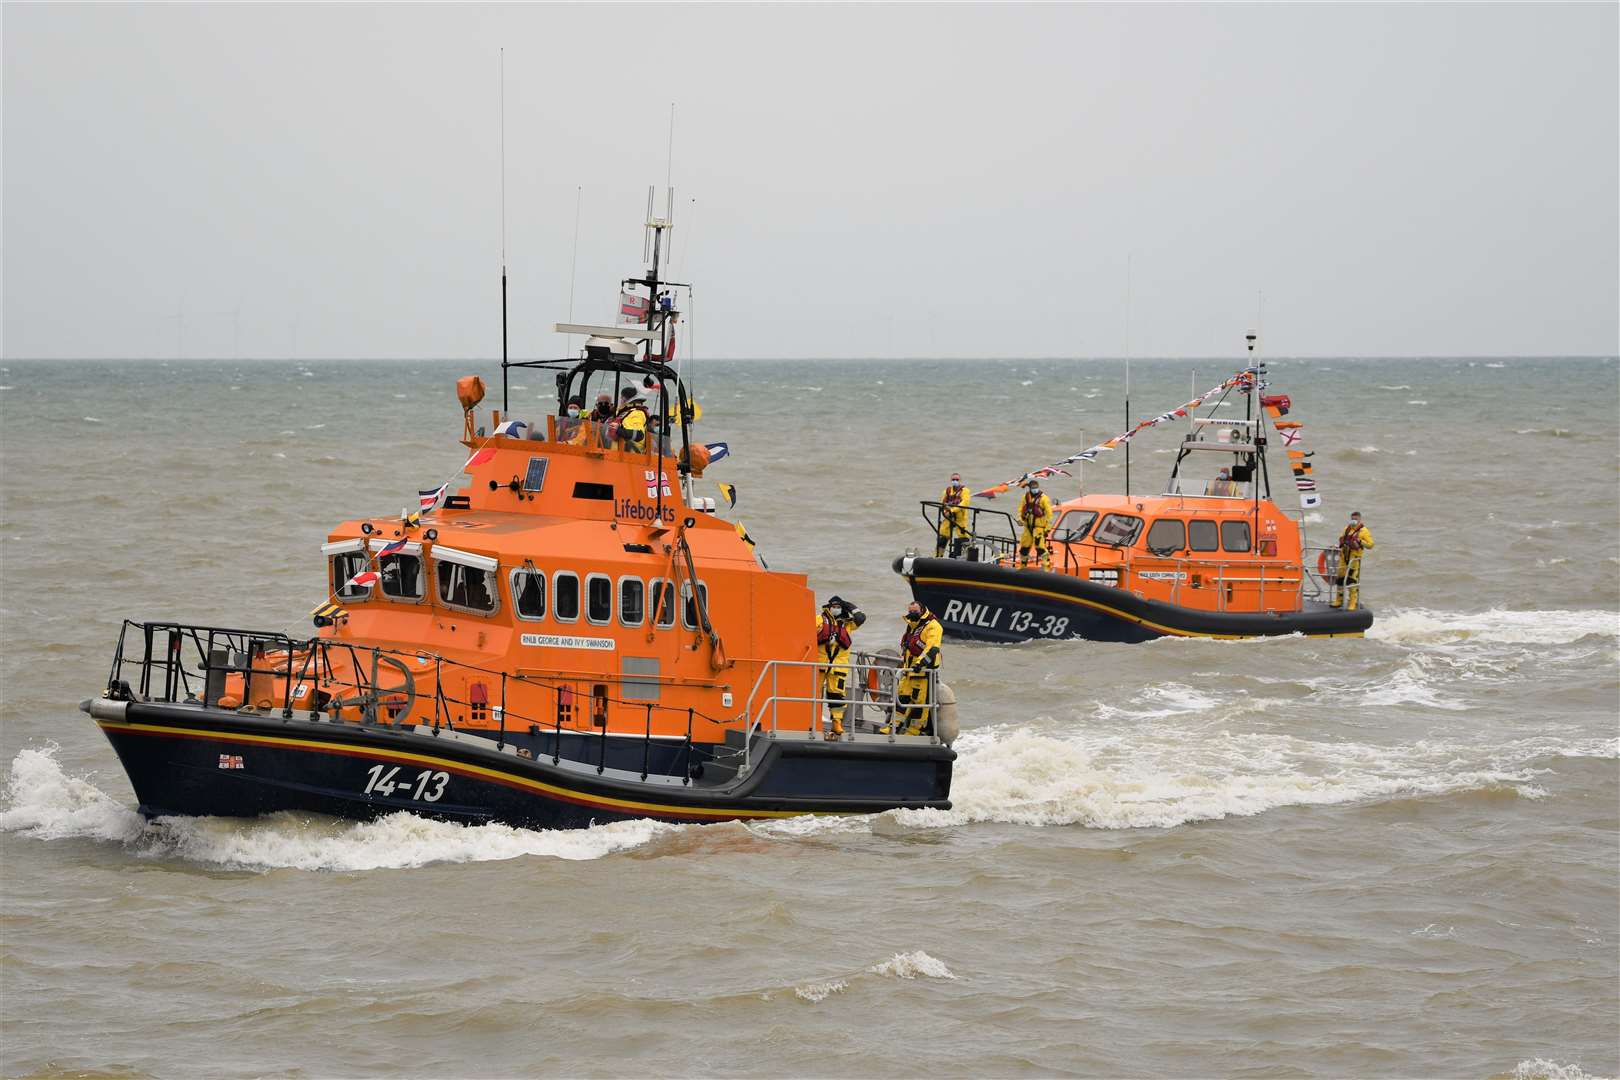 Old and new Sheerness lifeboats - the George and Ivy Swanson, left, and the smaller Judith Copping Joyce off Minster, Sheppey. Picture: RNLI Vic Booth